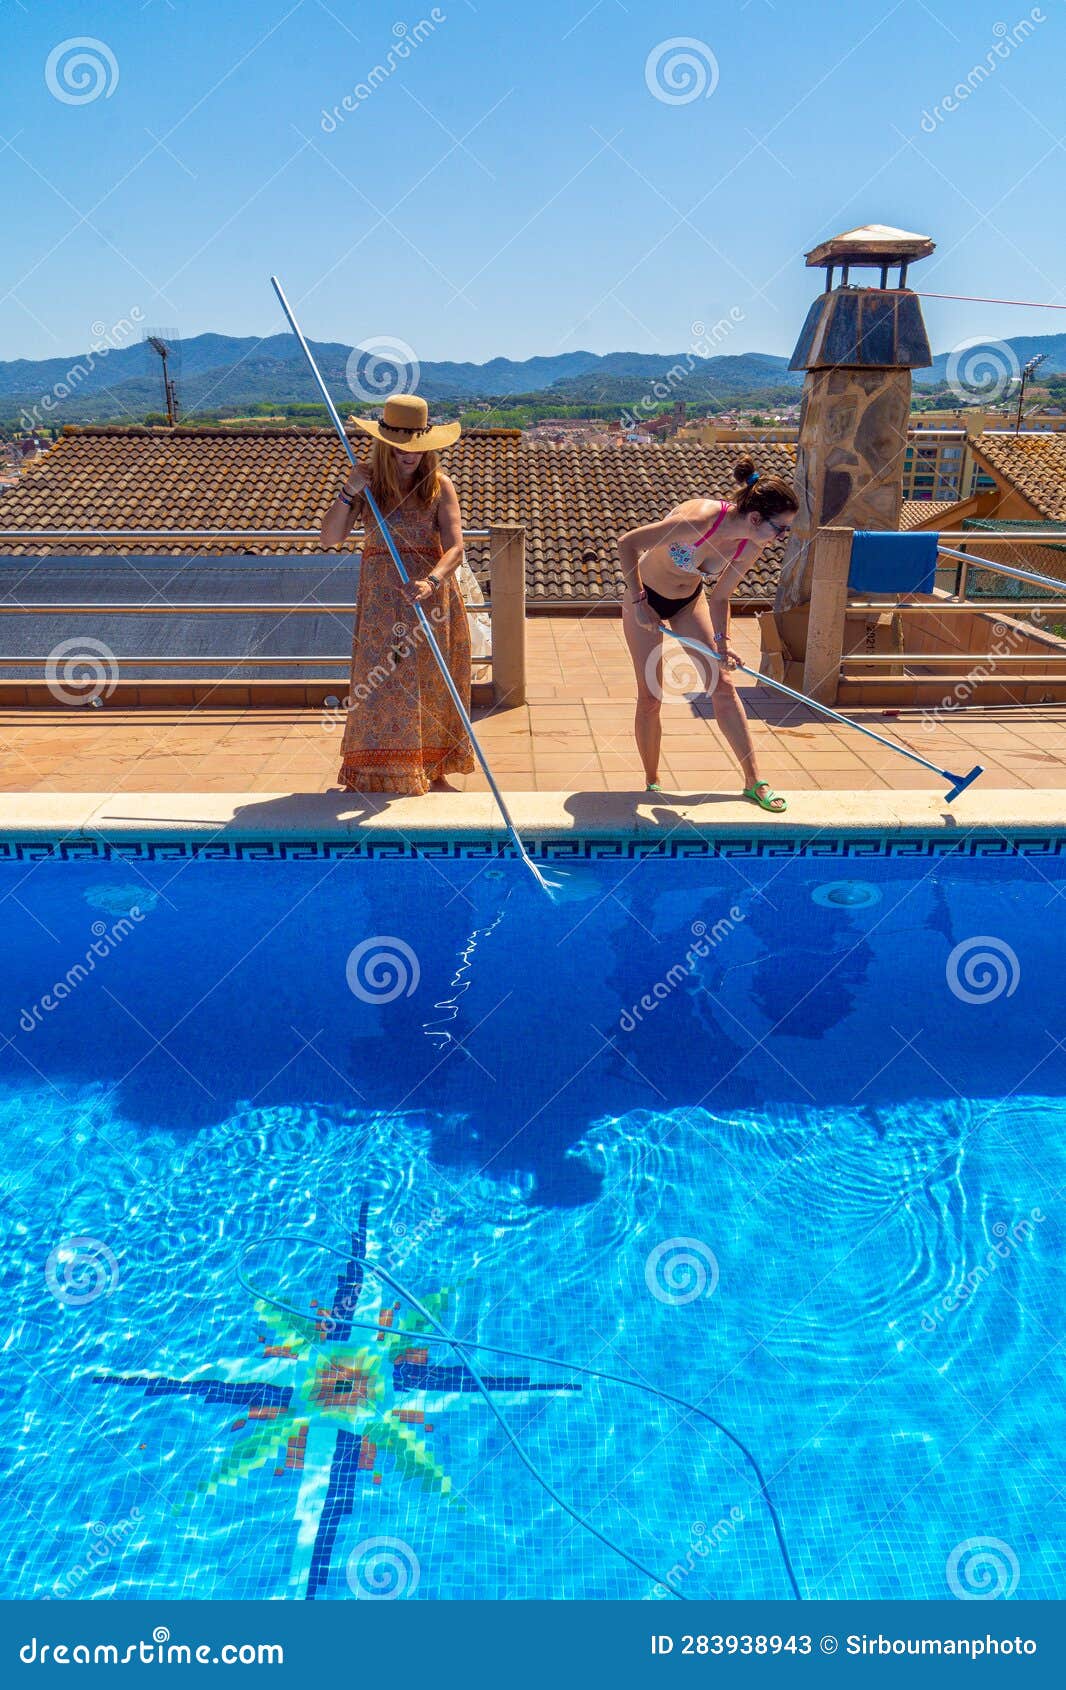 Two Lesbian Couple Friends Smiling and Cleaning a Swimming Pool